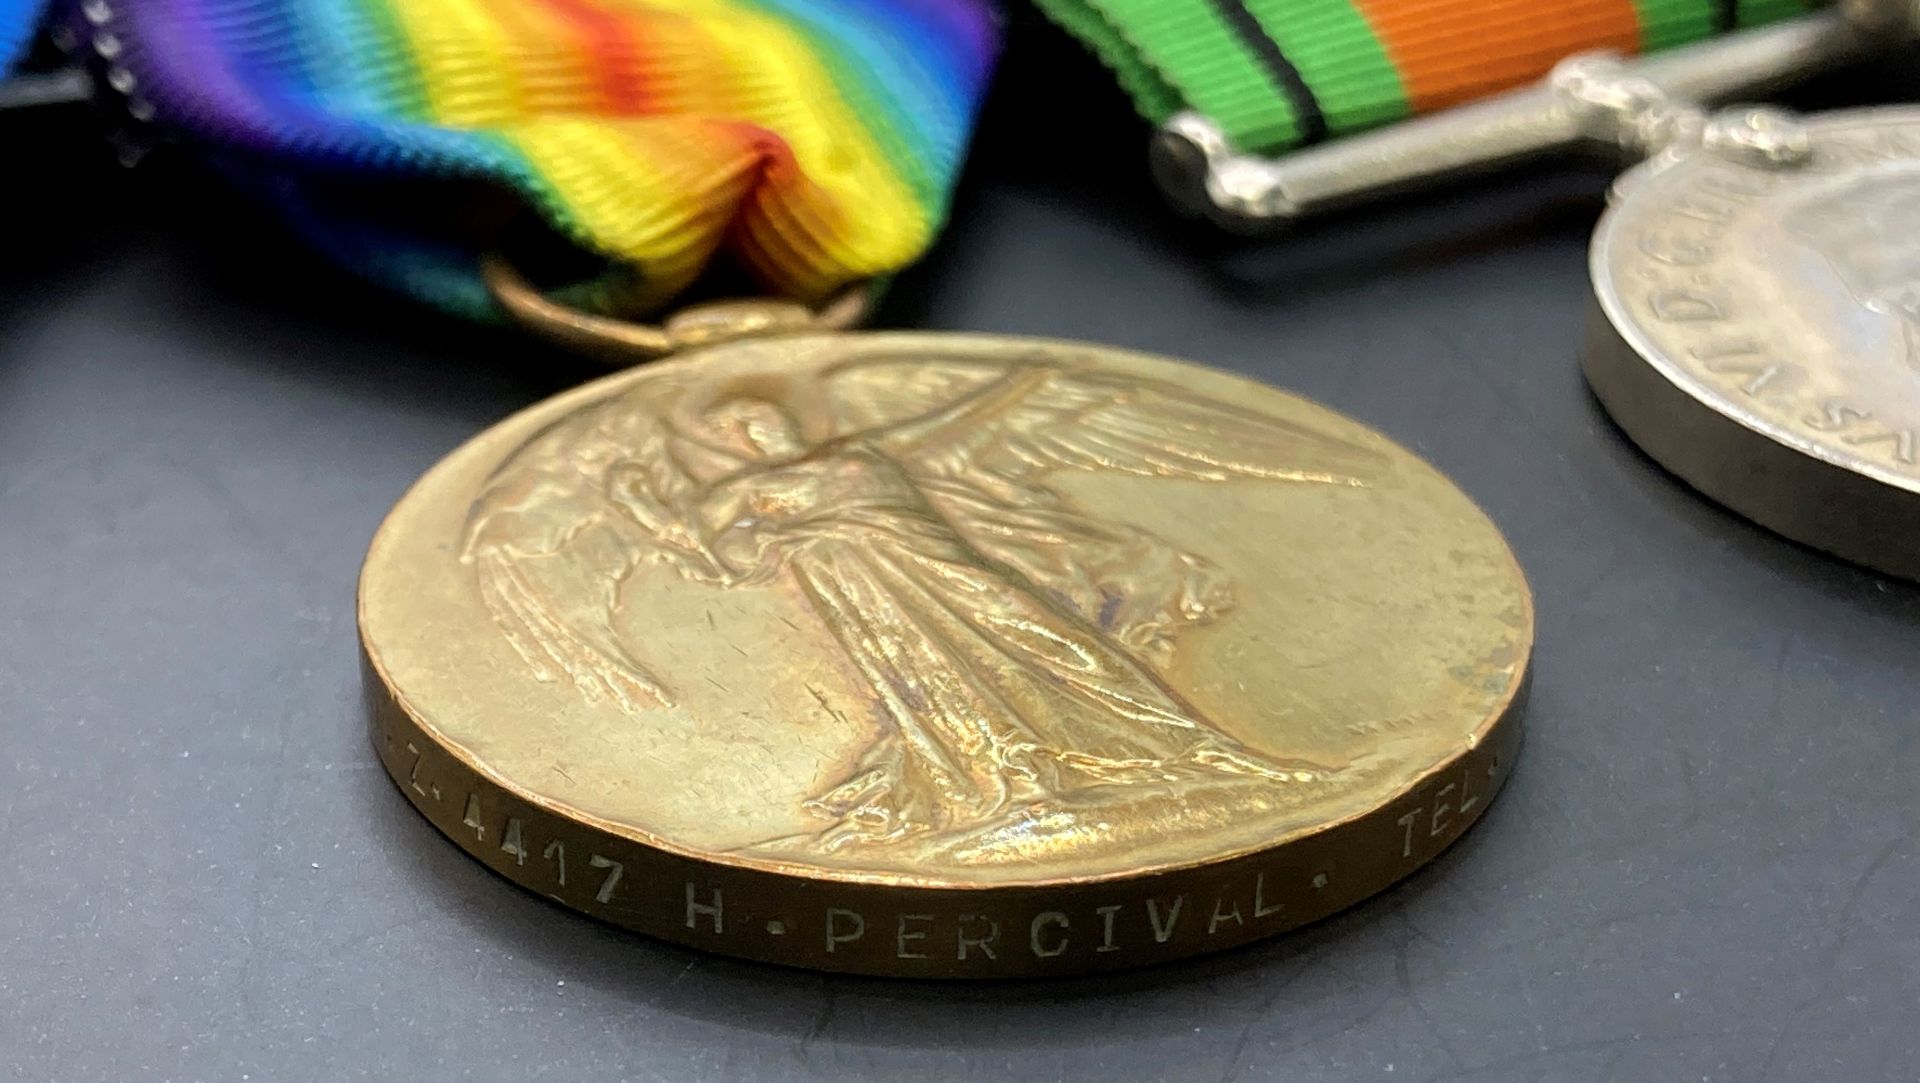 WW1 & 2 Group RNVR & RASC to H. Percival. British War Medal, Victory Medal (M.Z. 4417 H. PERCIVAL. - Image 3 of 4